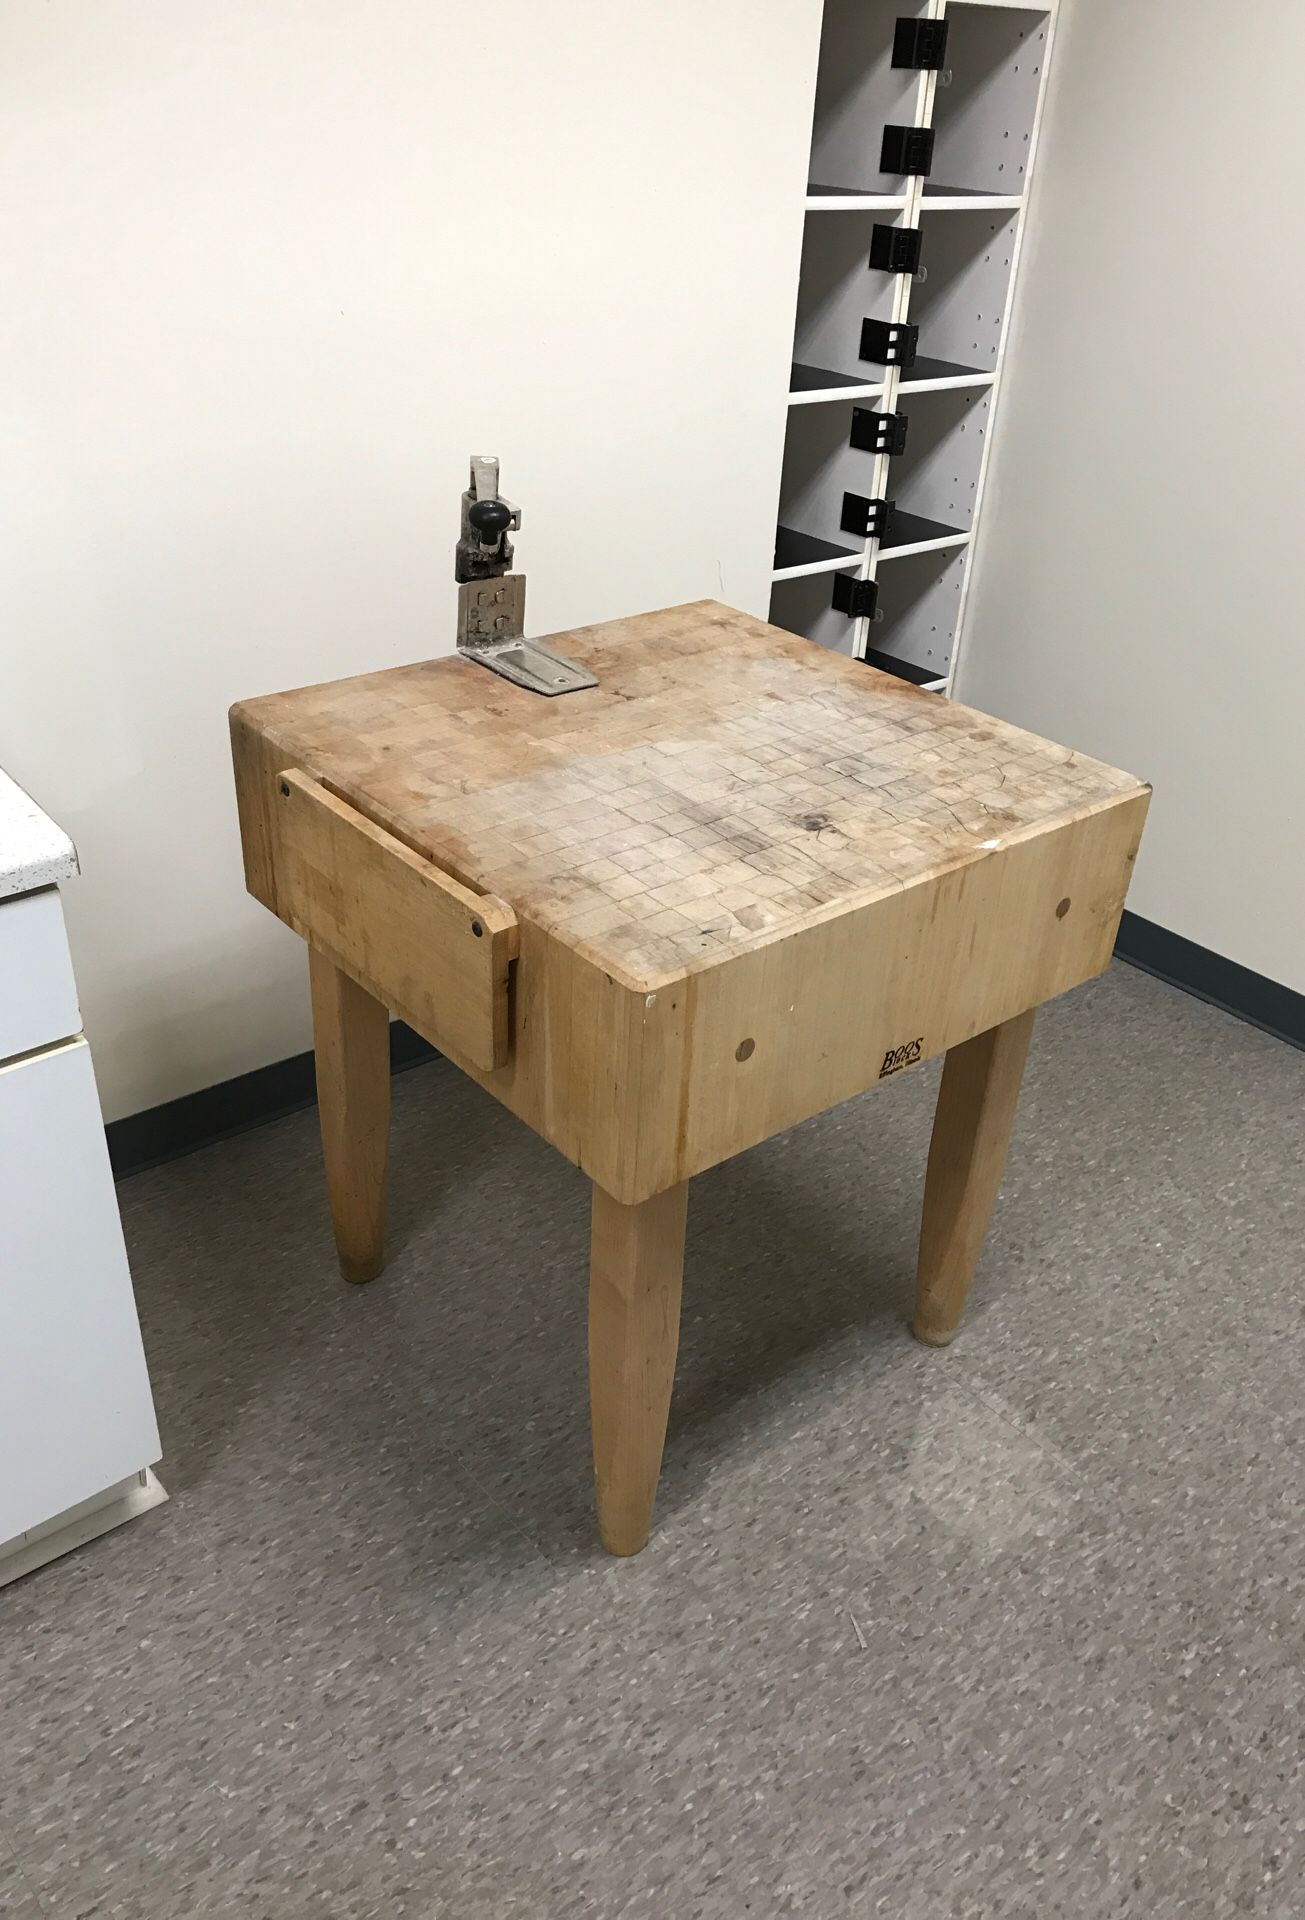 Butcher block with can opener